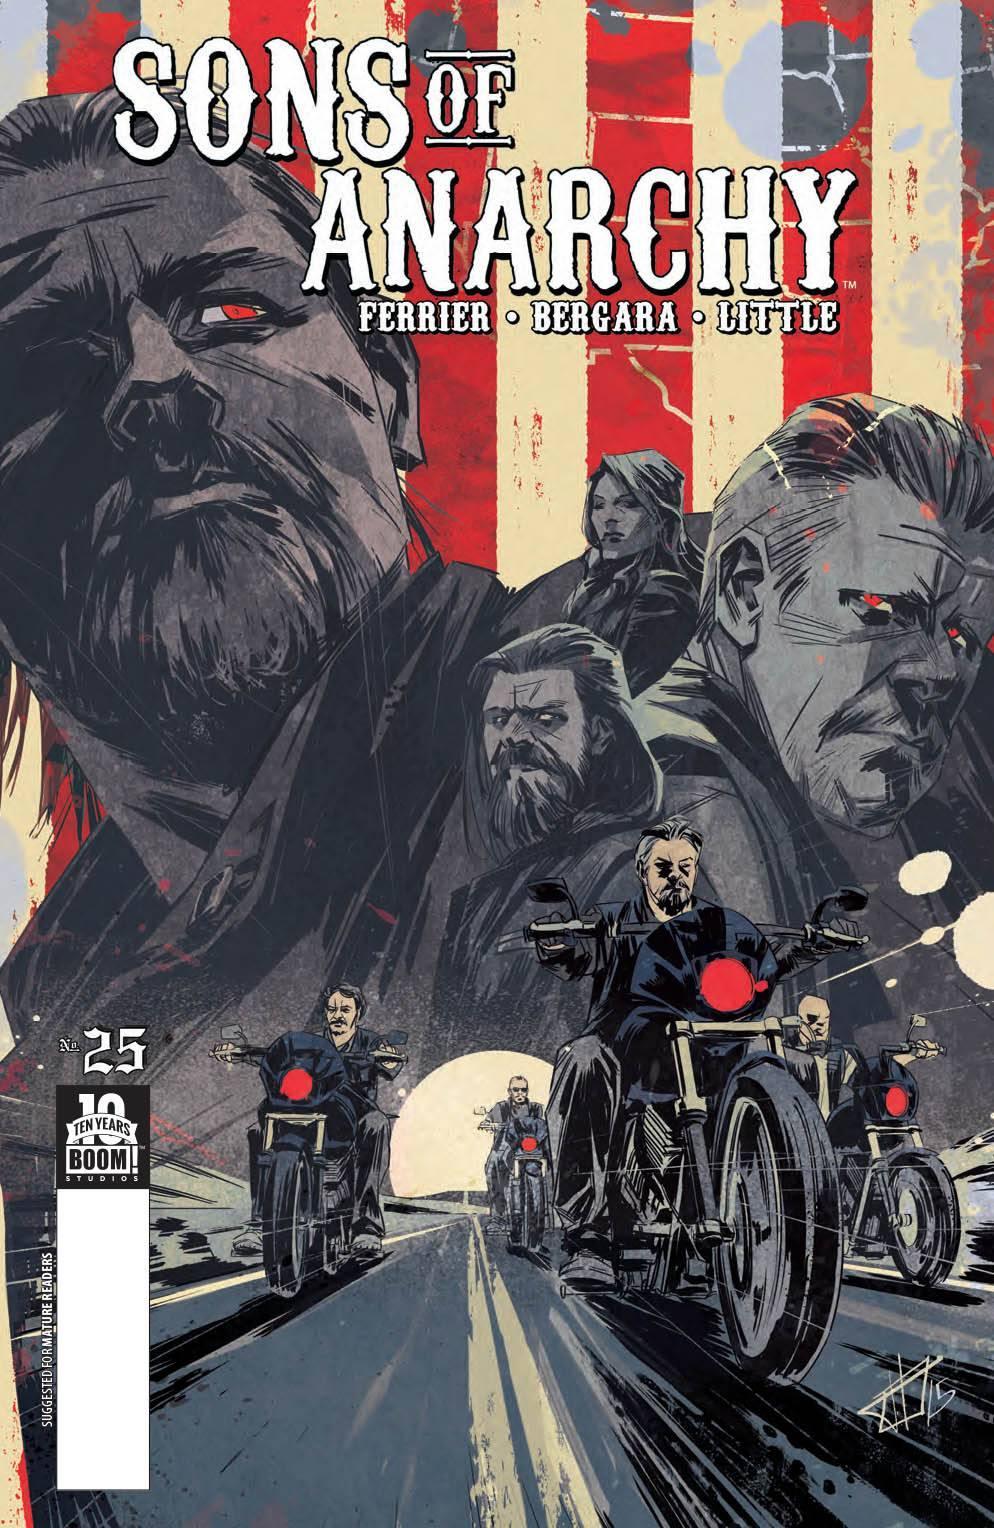 SONS OF ANARCHY #25 - Kings Comics